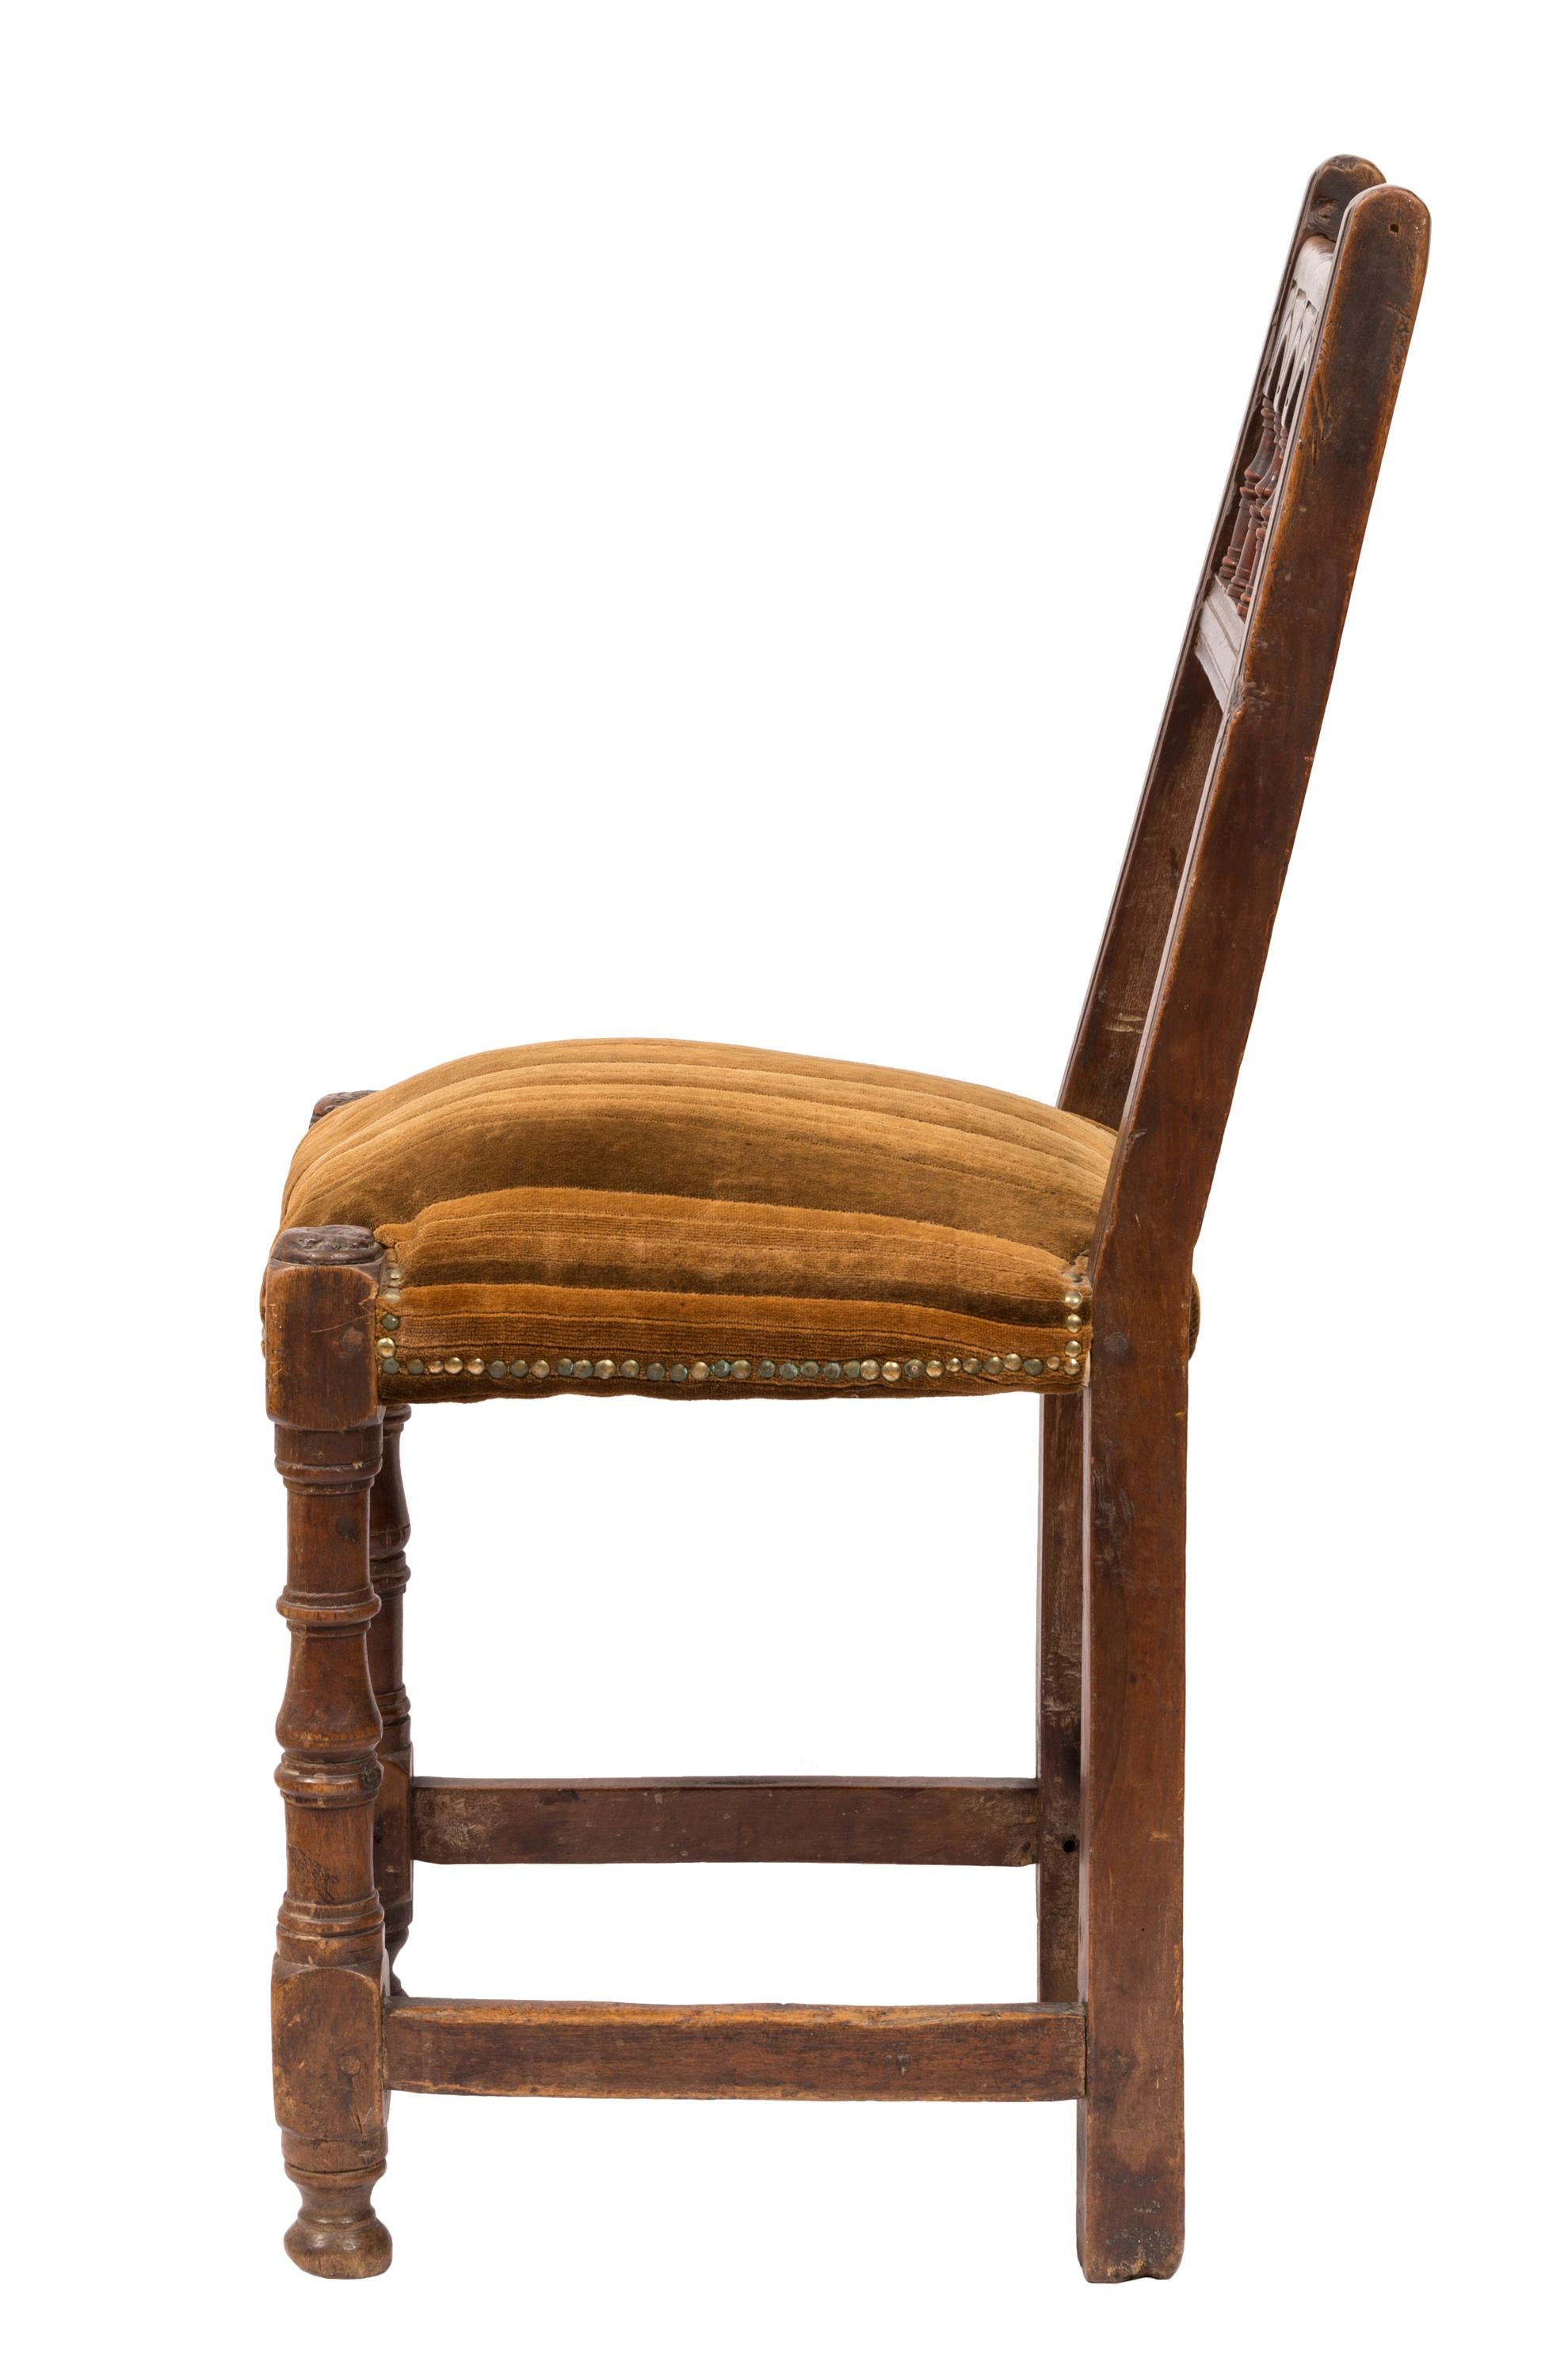 19th Century Set of Antique Handmade, Upholstered Rustic Wood Chairs from Northern Spain For Sale